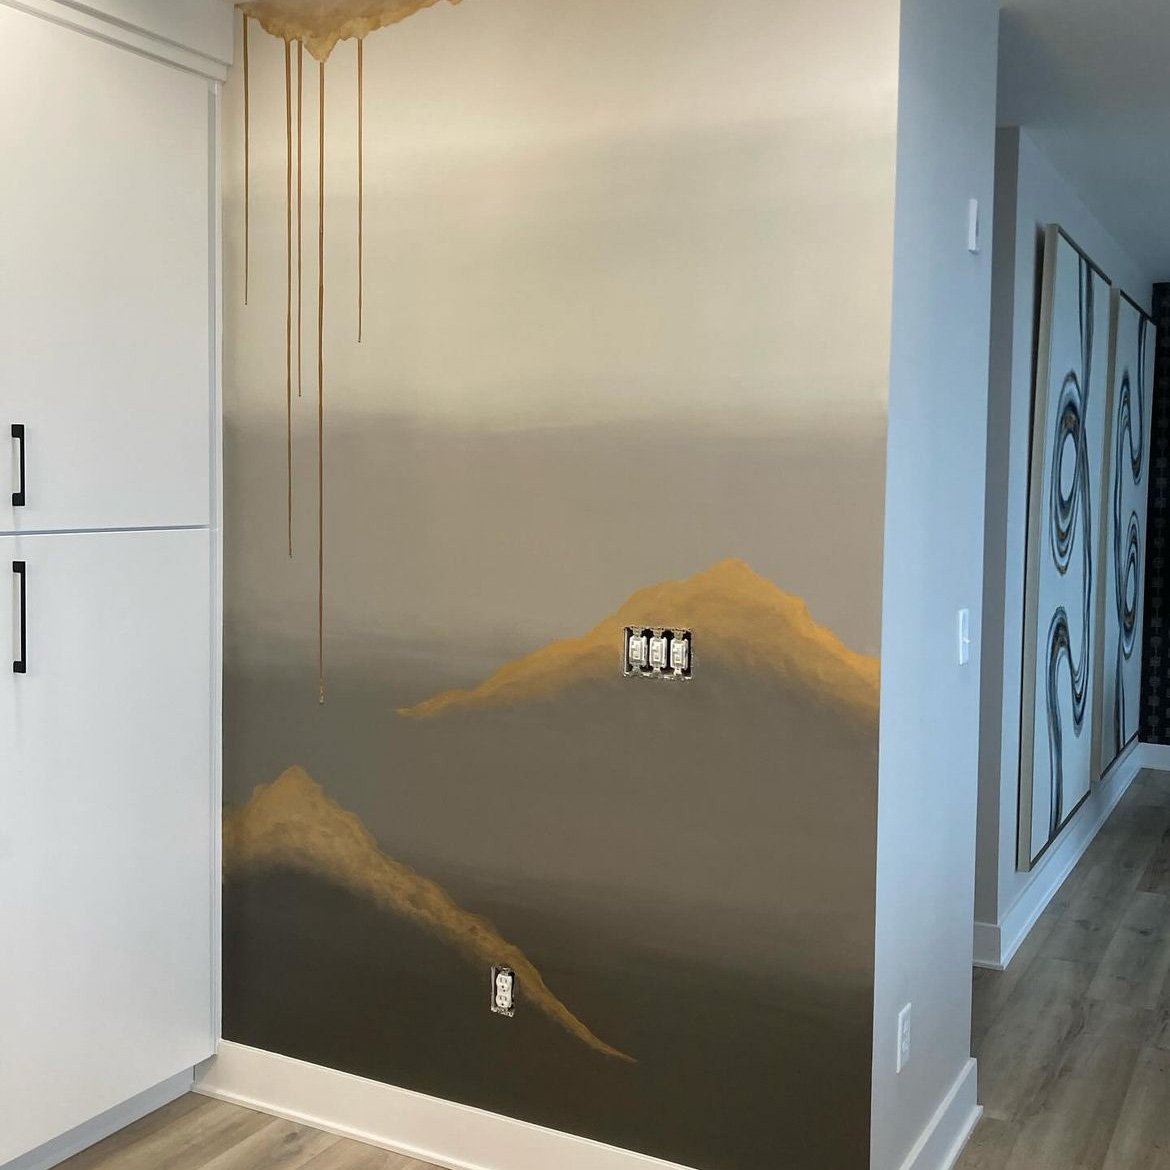 Thanks so much to @cassigraber for painting these beautiful ombre walls for our client! Visit our YouTube channel to learn more about this project! 
.
.
.
.
.
.
.
#interiordesign #condodesign #interiordesigner #muralist #homedecor #mural #elkhartindi